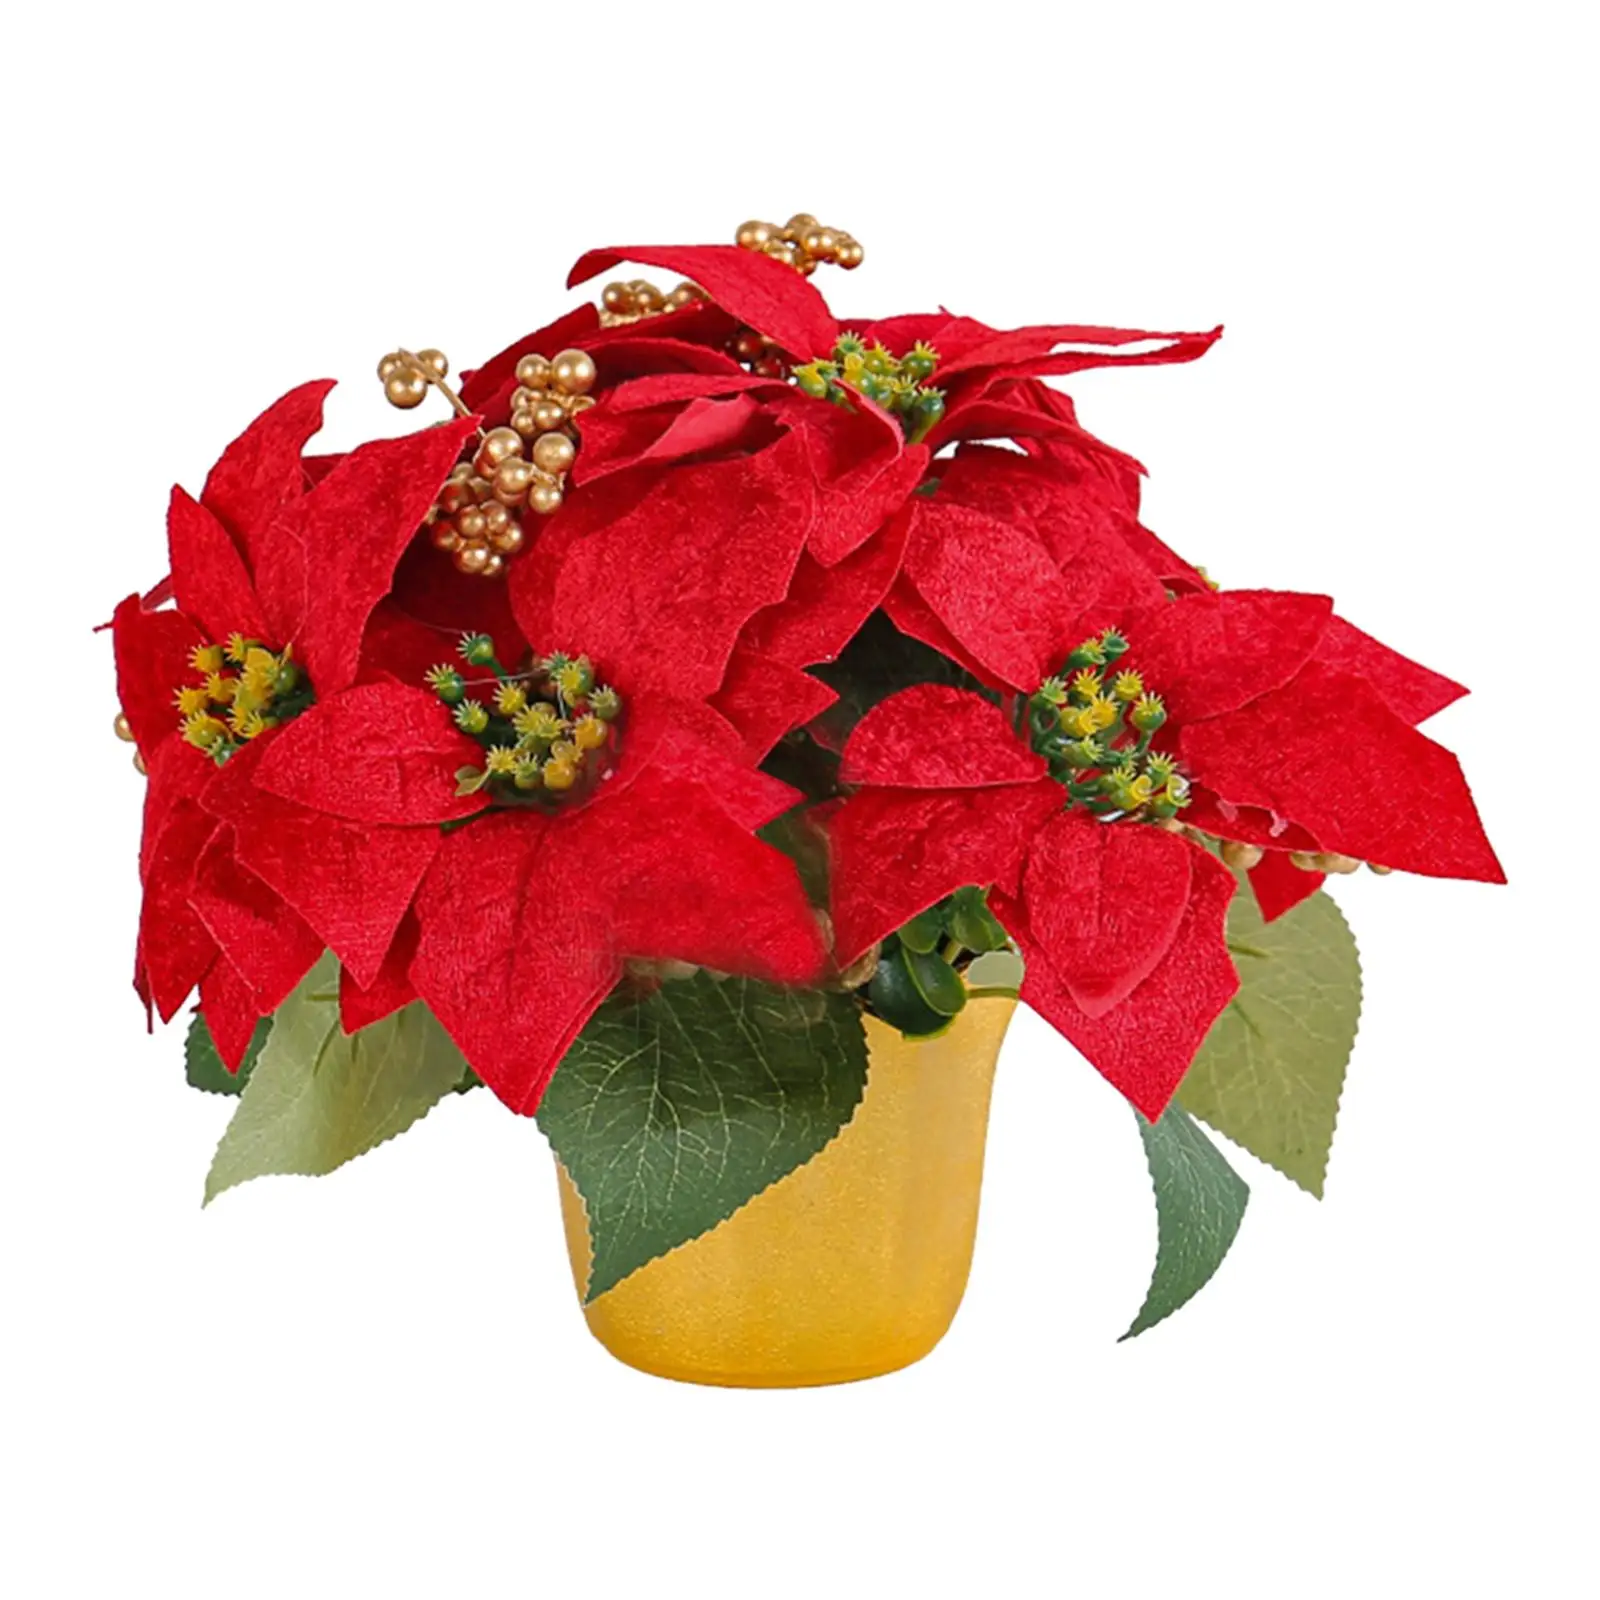 Potted Red Poinsettia Artificial Red Poinsettia Plant for Table Centerpiece